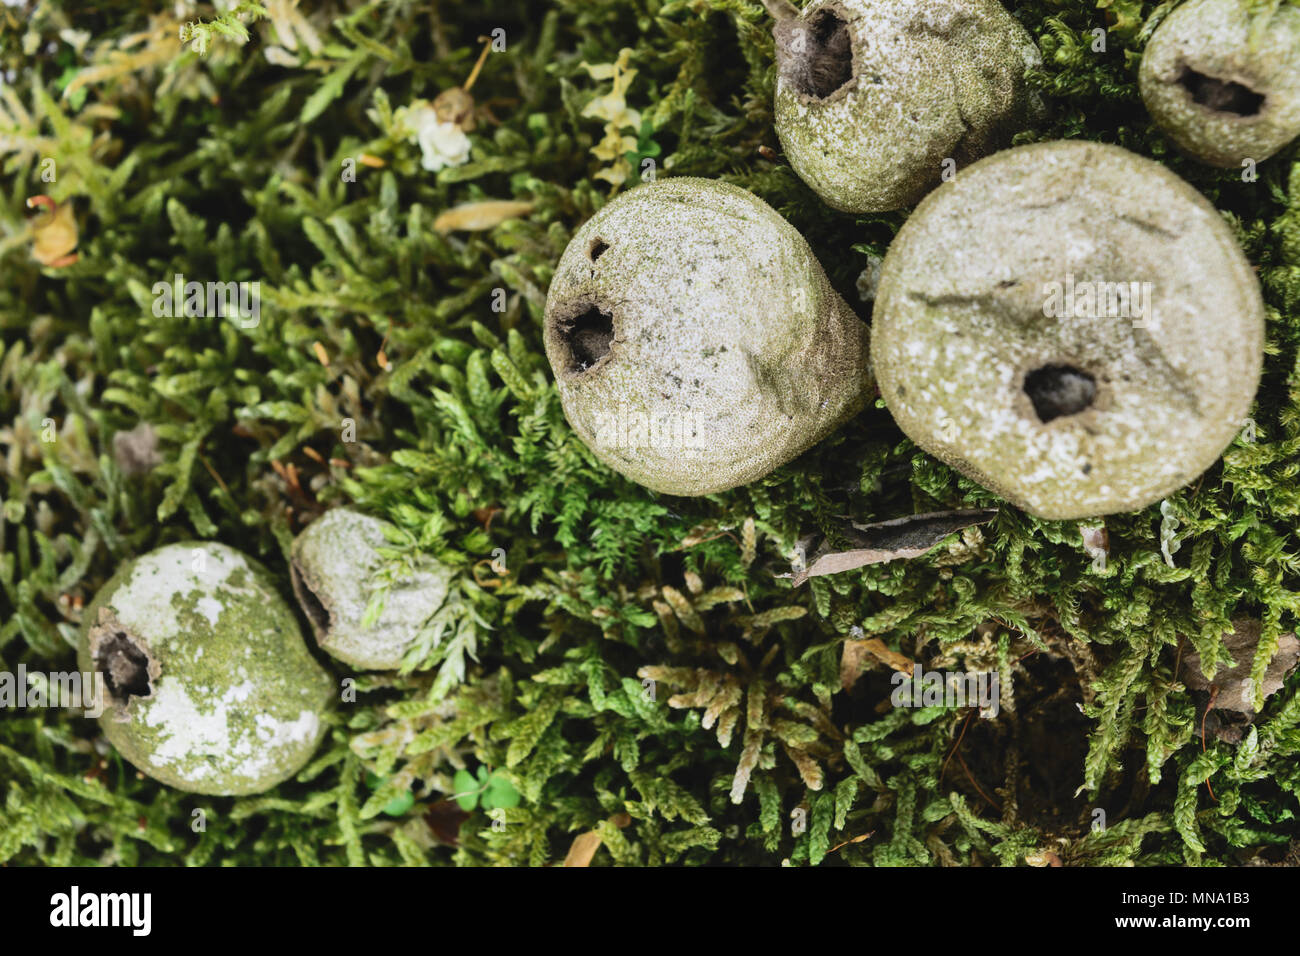 Puffball fungus mushrooms on green moss background. Central mushroom is in focus Stock Photo